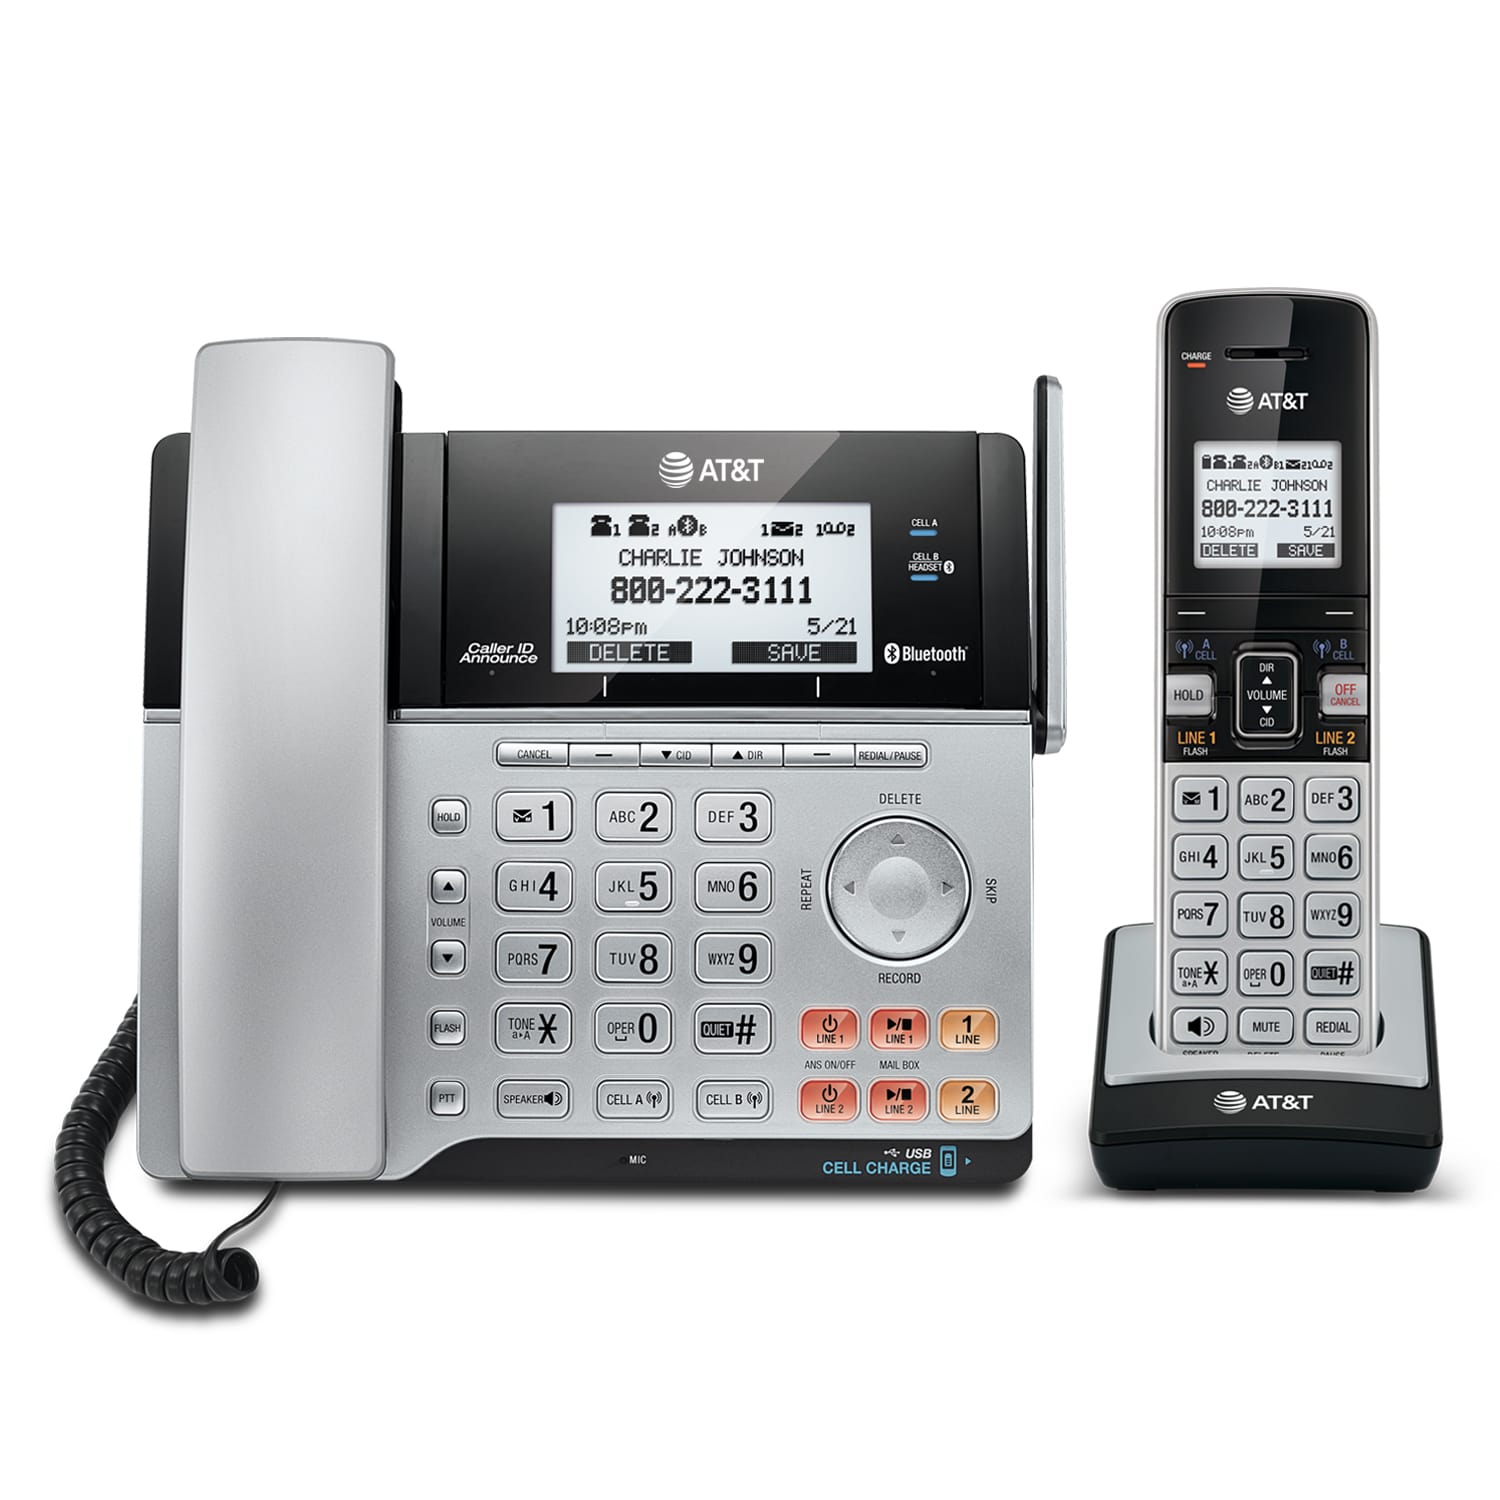 1 Handset AT&T 1070 4-Line Expandable Corded Phone System with Caller ID/Call Waiting and Speakerphone Black/Silver Renewed 